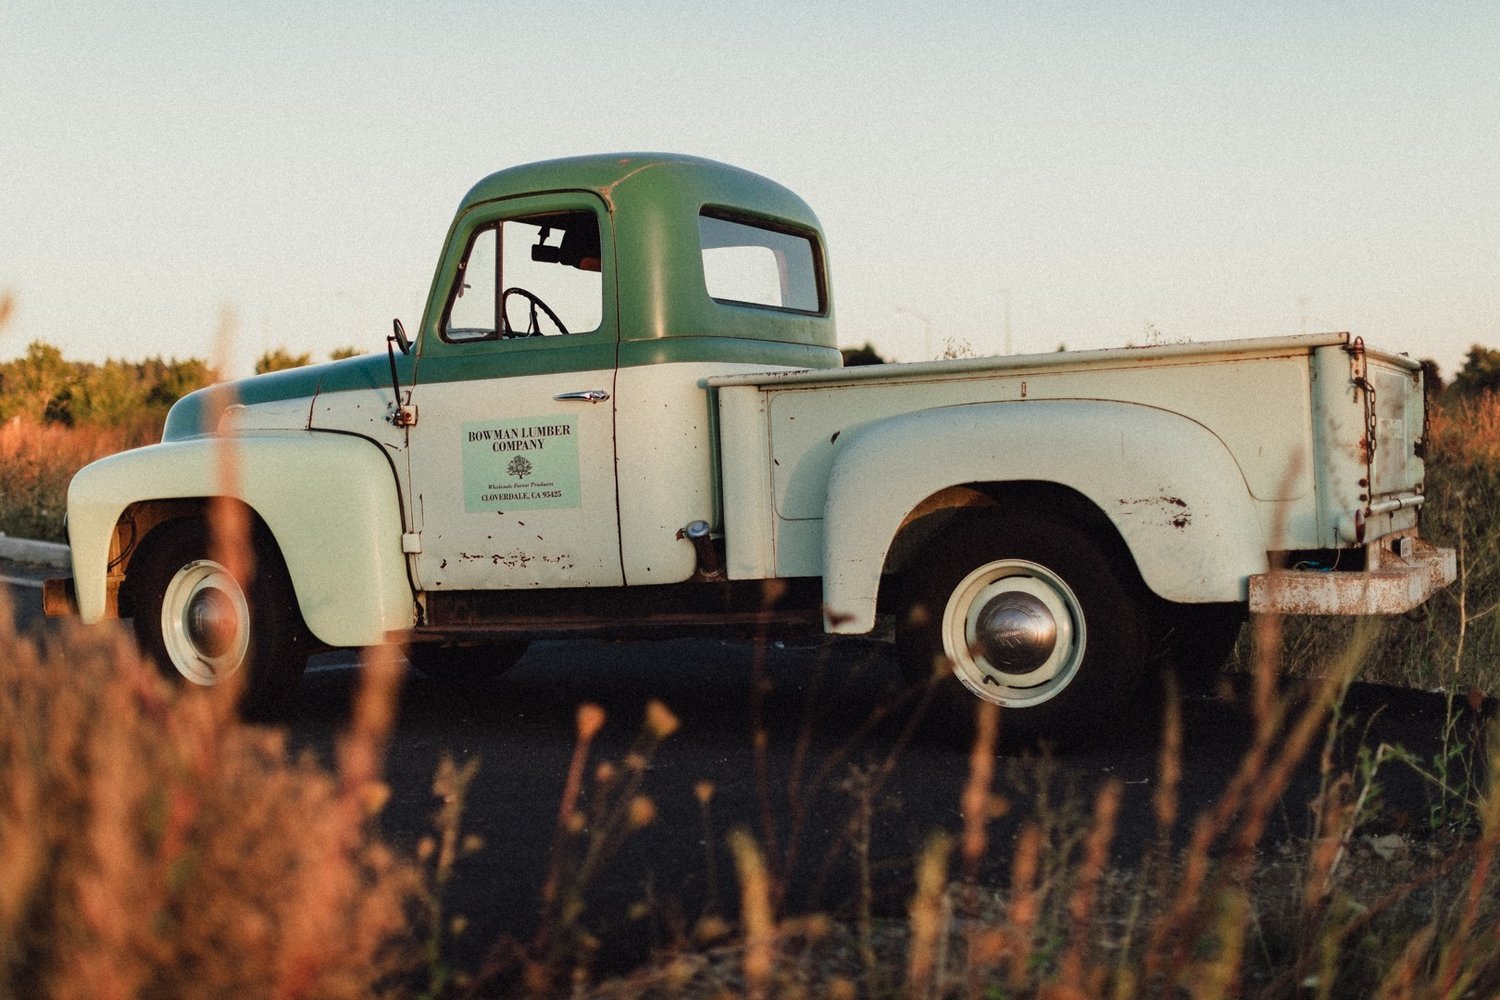 Lisa Steenson loves her 1956 International Harvester truck. The company was founded in 1902 as an agricultural equipment manufacturer and went away in 1985.